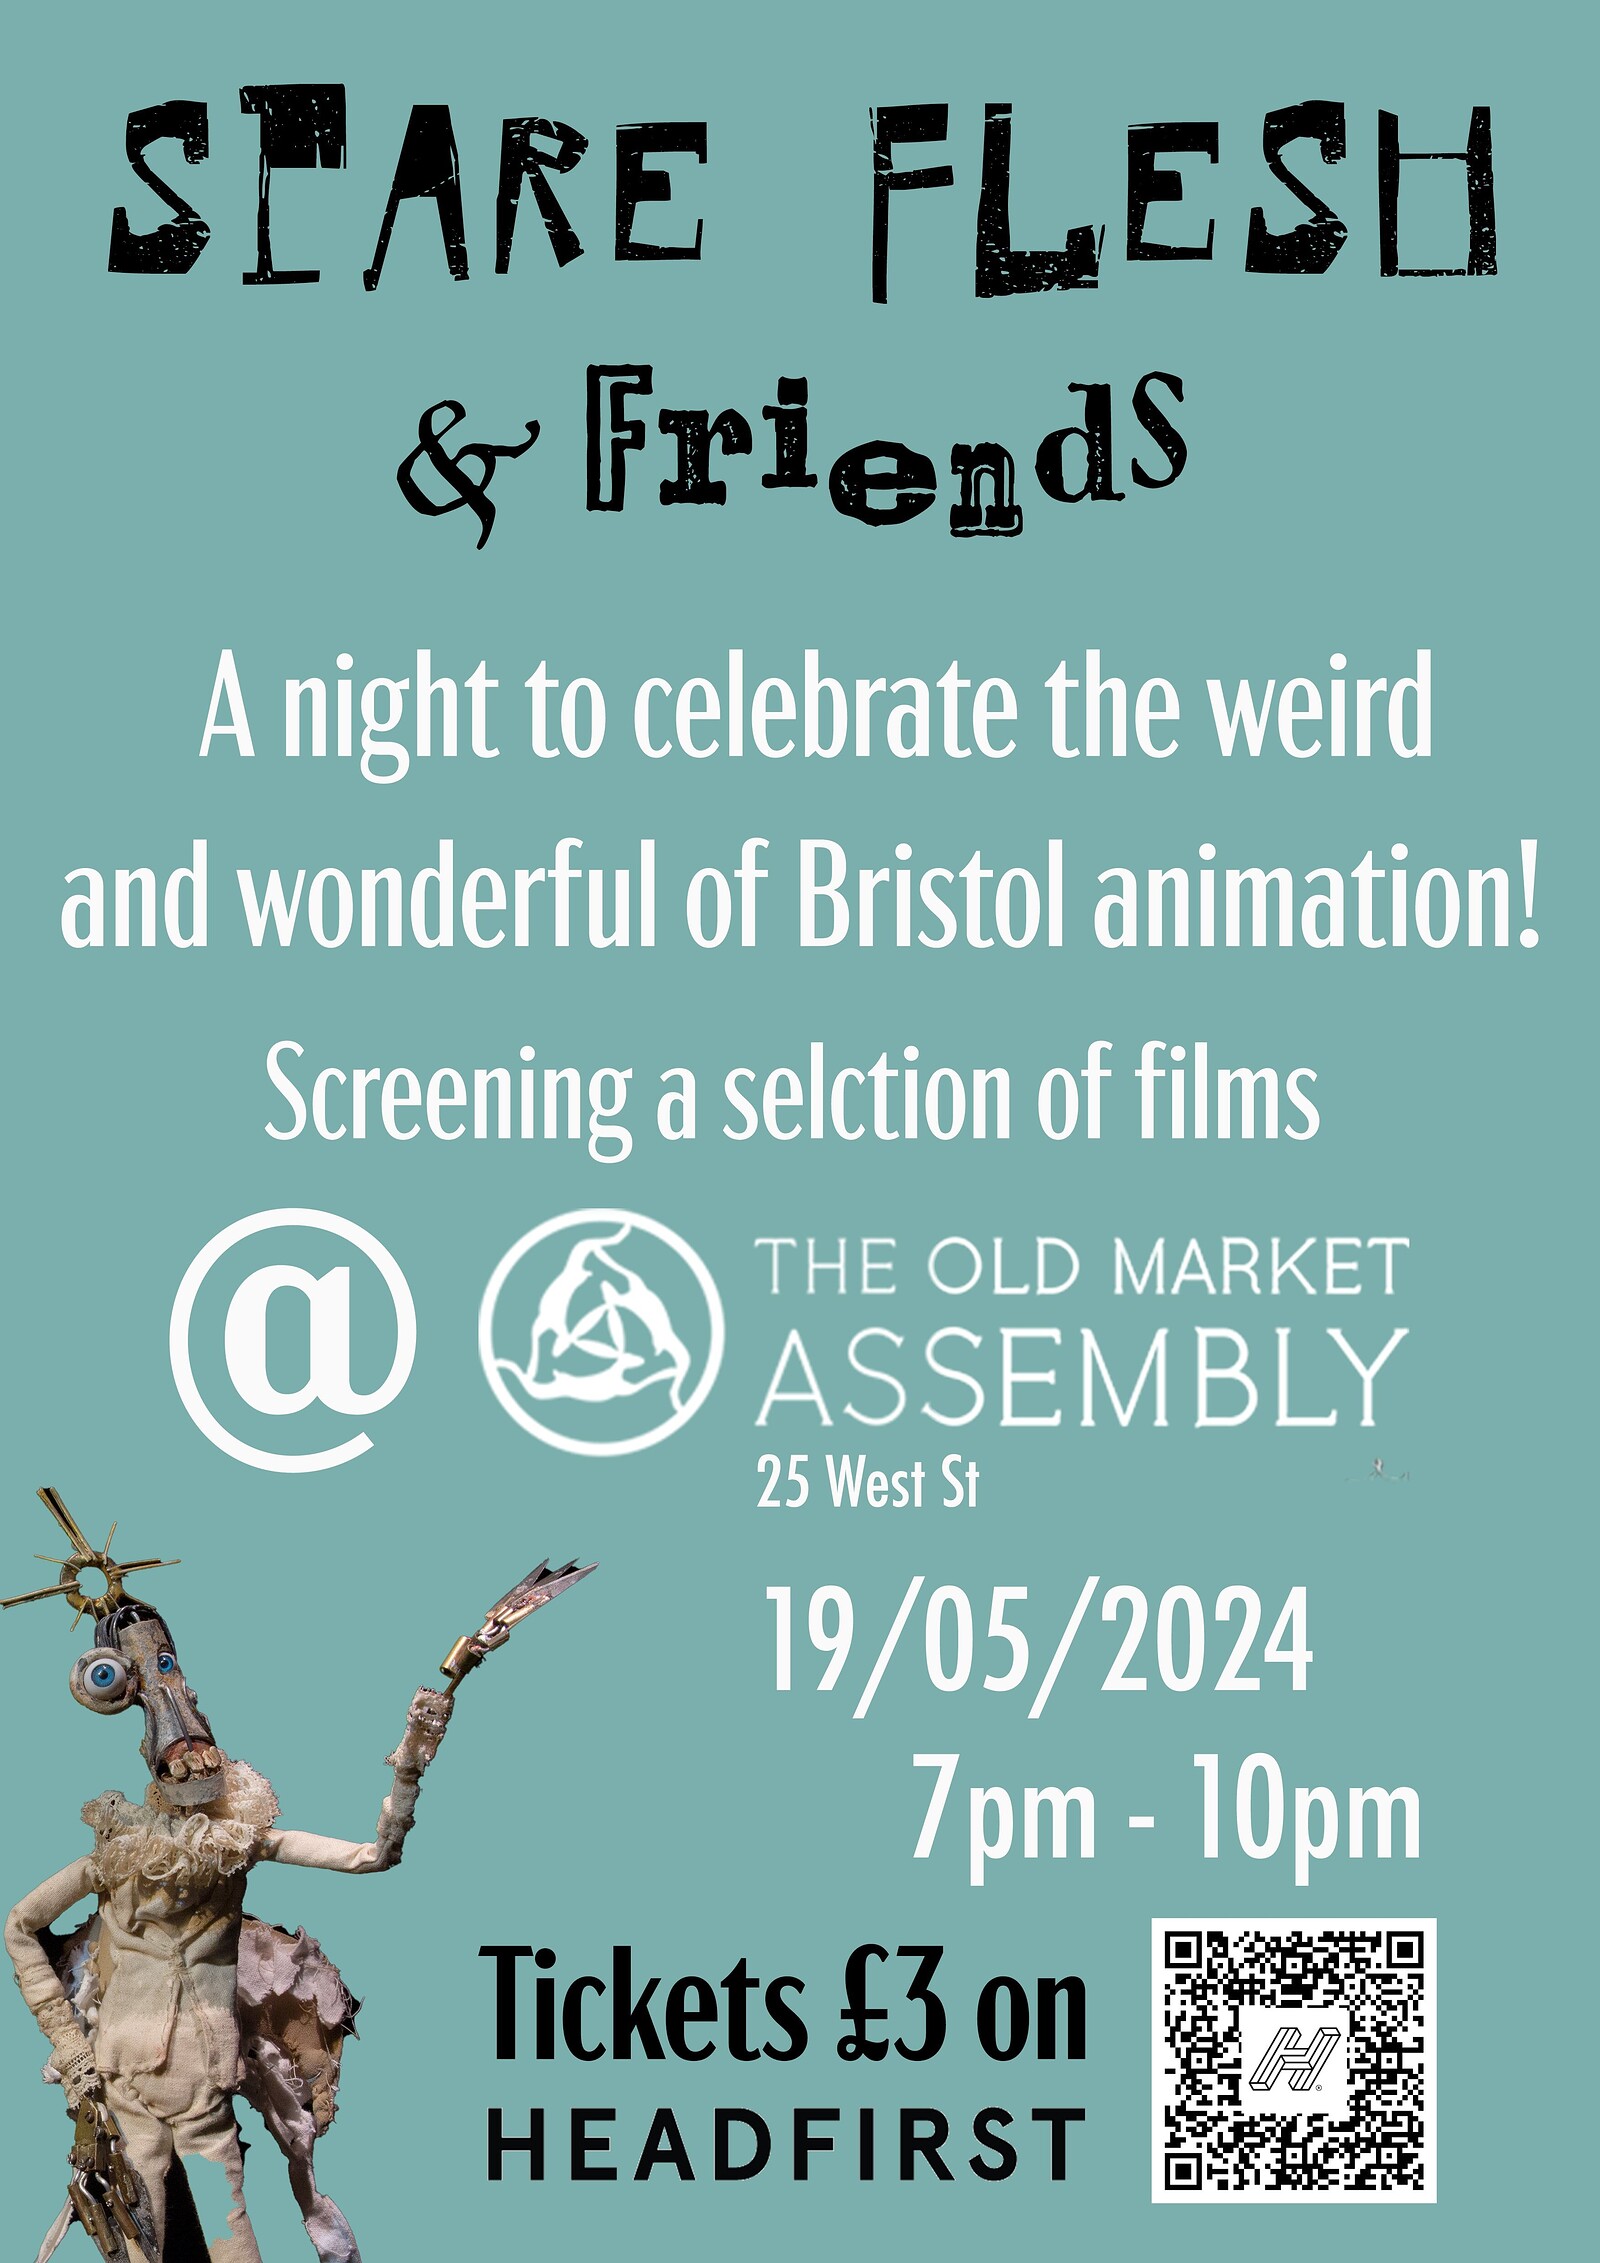 Spare Flesh & Friends - Animation Screening at The Old Market Assembly